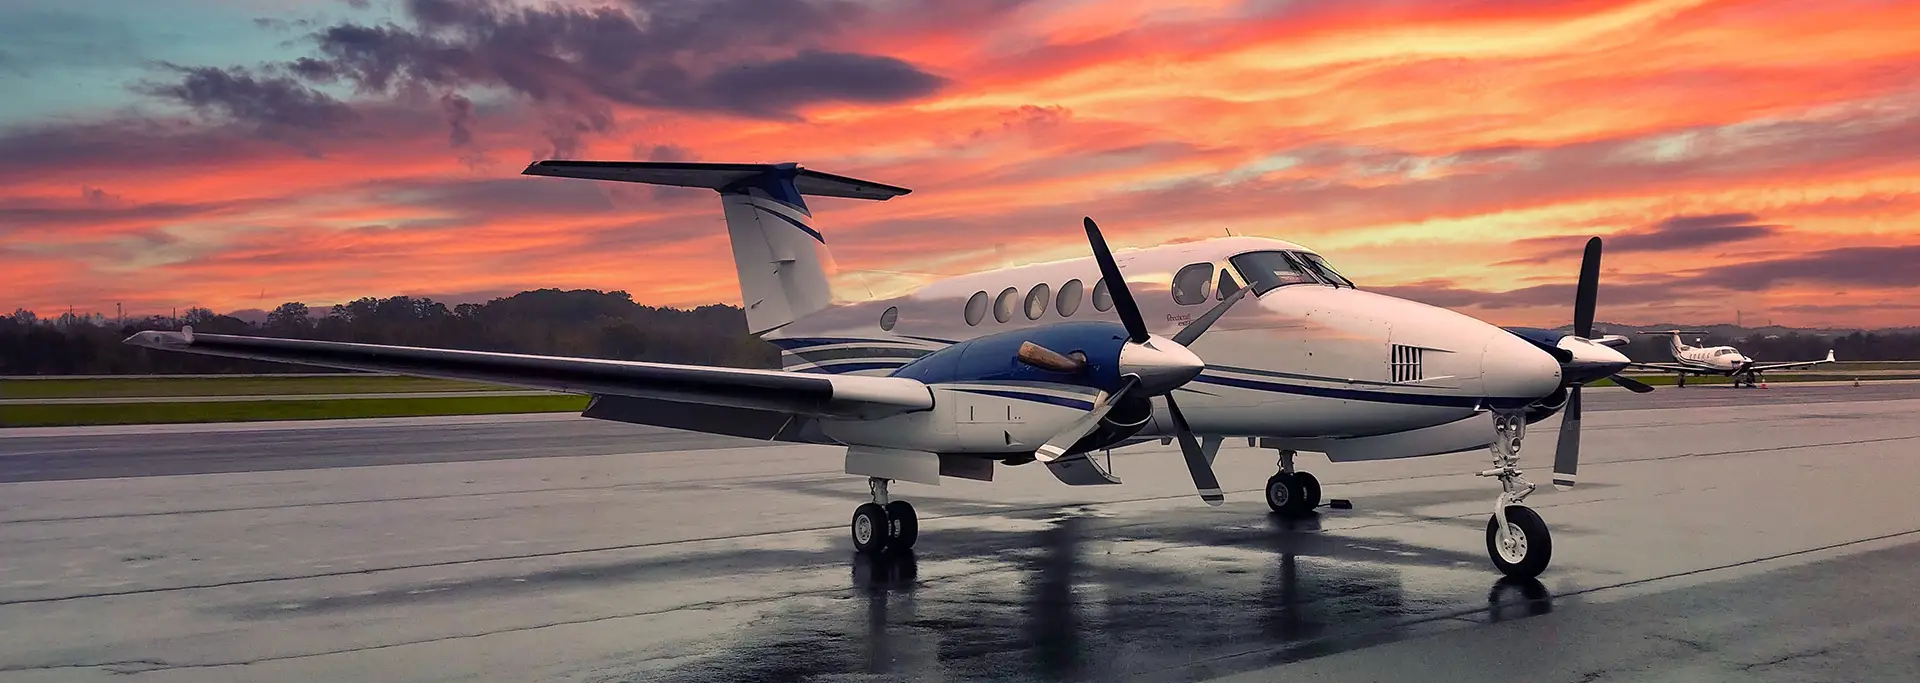 Aviation SEO, Private jet charters, Aerospace keywords, Airline content optimisation, Aviation companies, Aircraft management, Business aviation, Charter jet services, Private jet rental, Executive jet trave